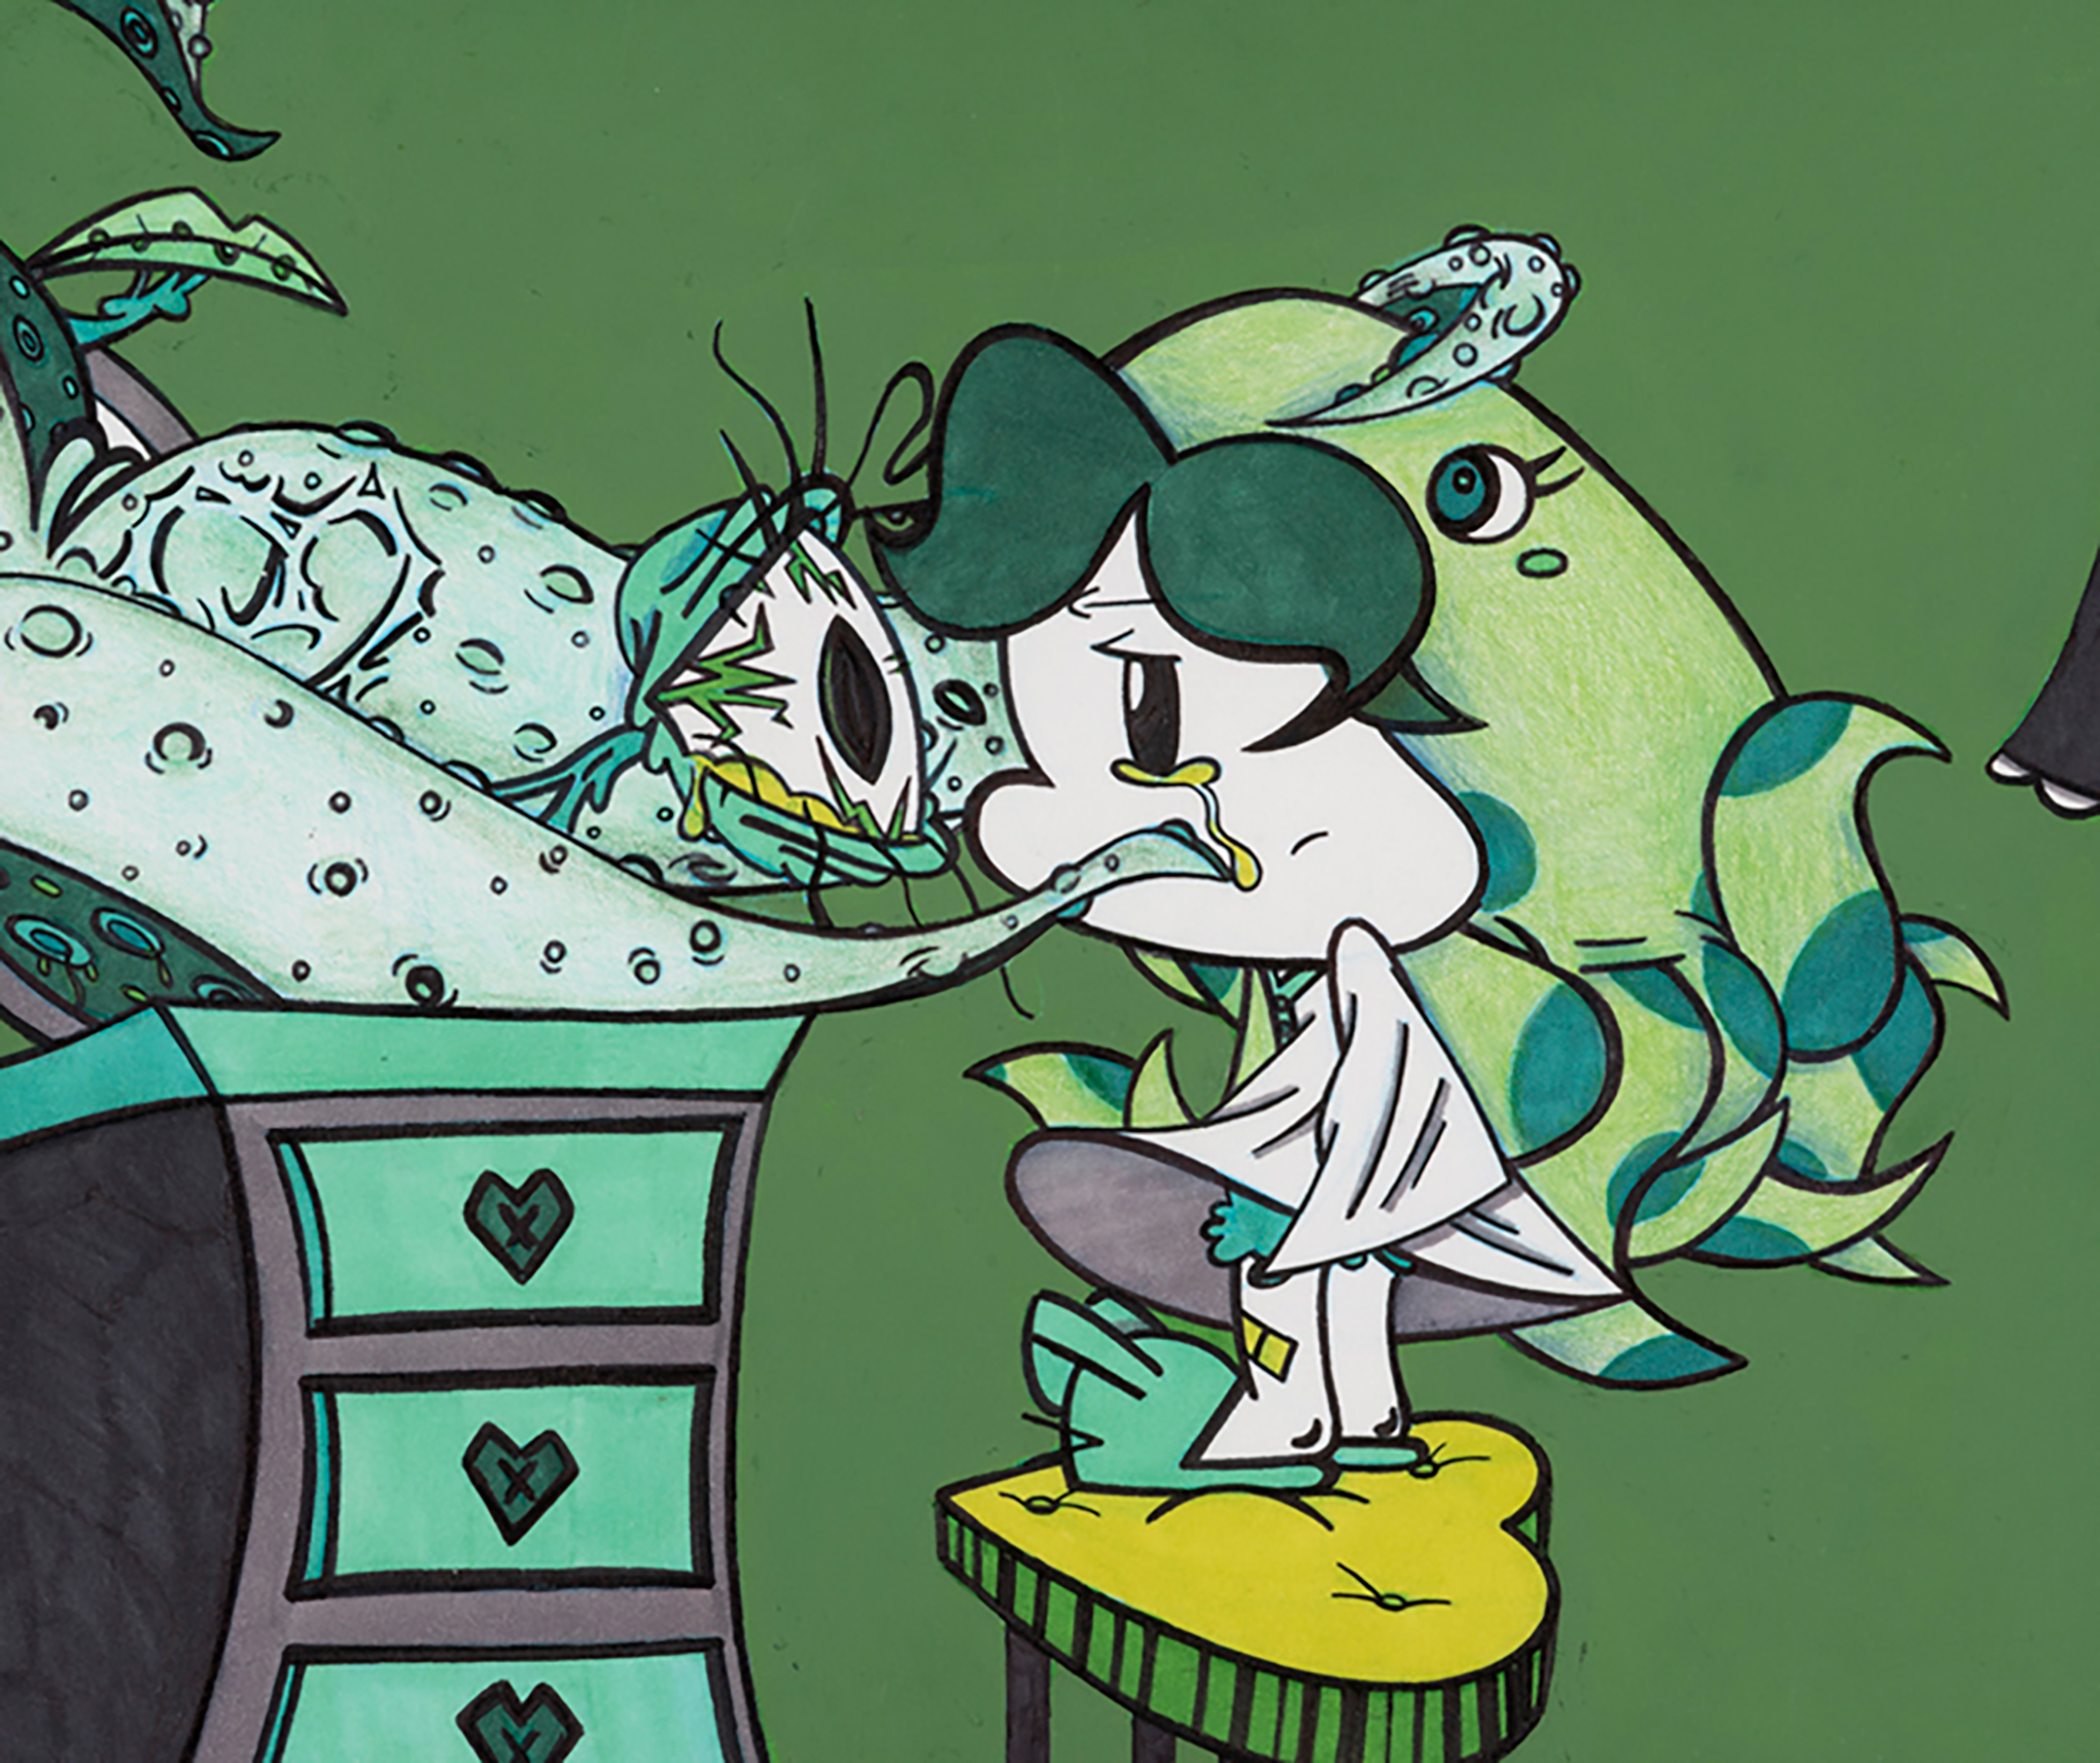 an artwork created in various shades and hues of green, with a cartoon girl standing on a heart-shaped seat at the center staring at a one-eyed tentacled bug-like creature while a frog-like creature stands behind her